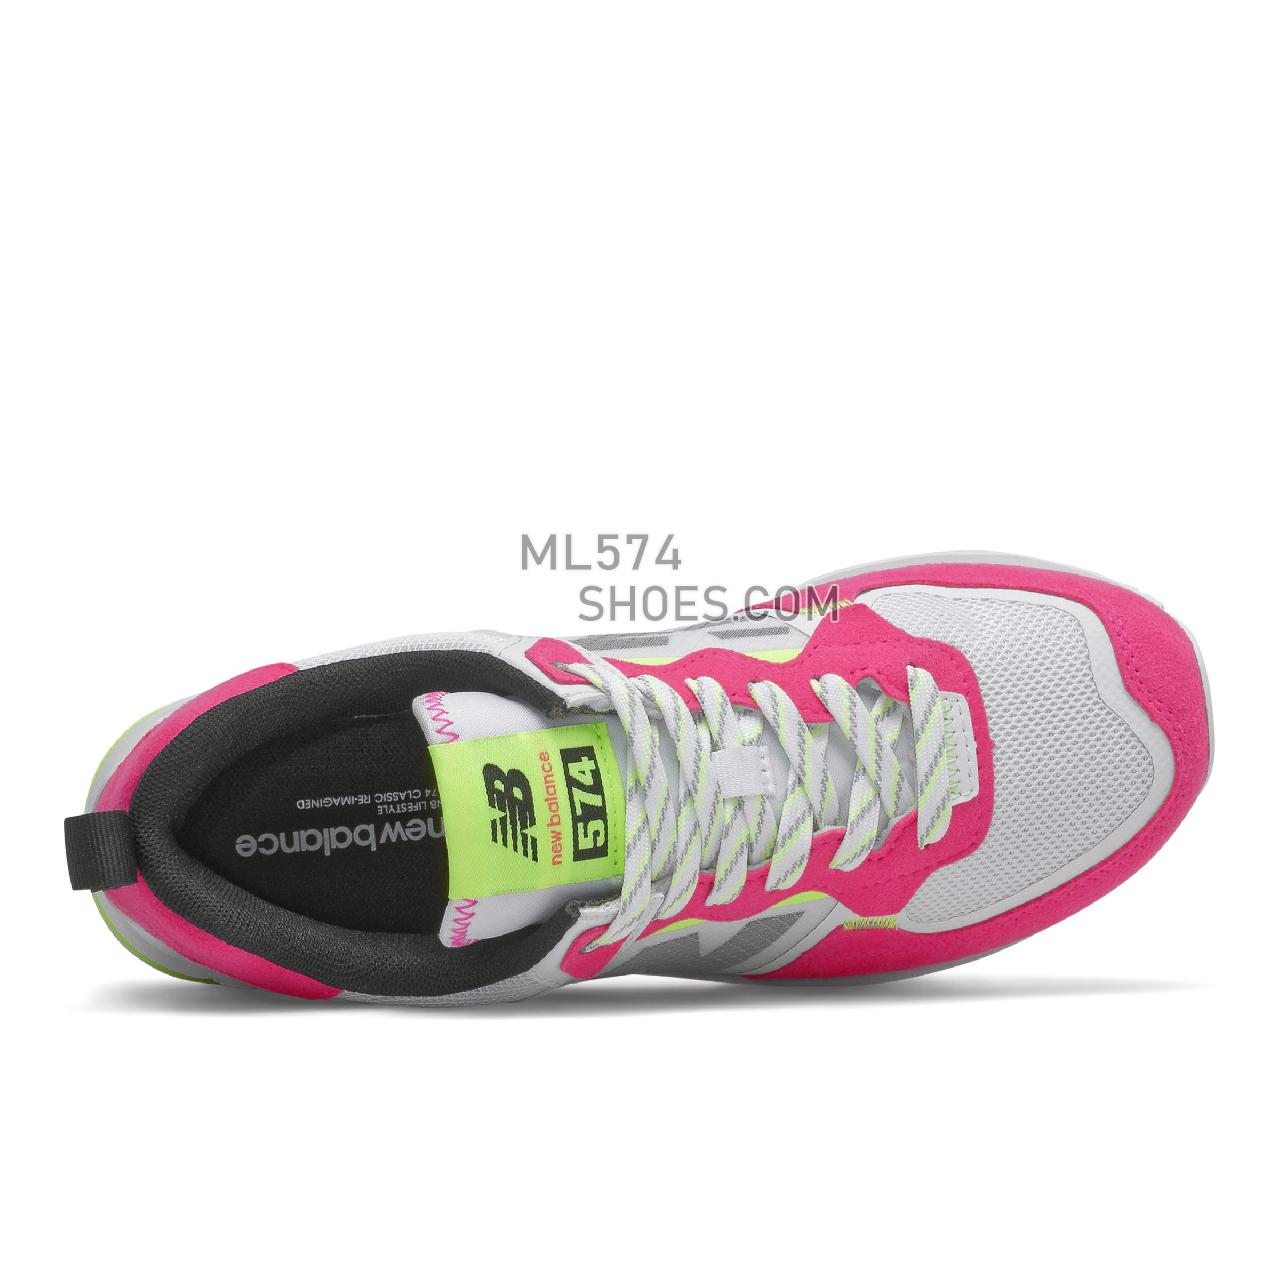 New Balance 574 - Women's Classic Sneakers - White with Pink Glo - WL574IW2